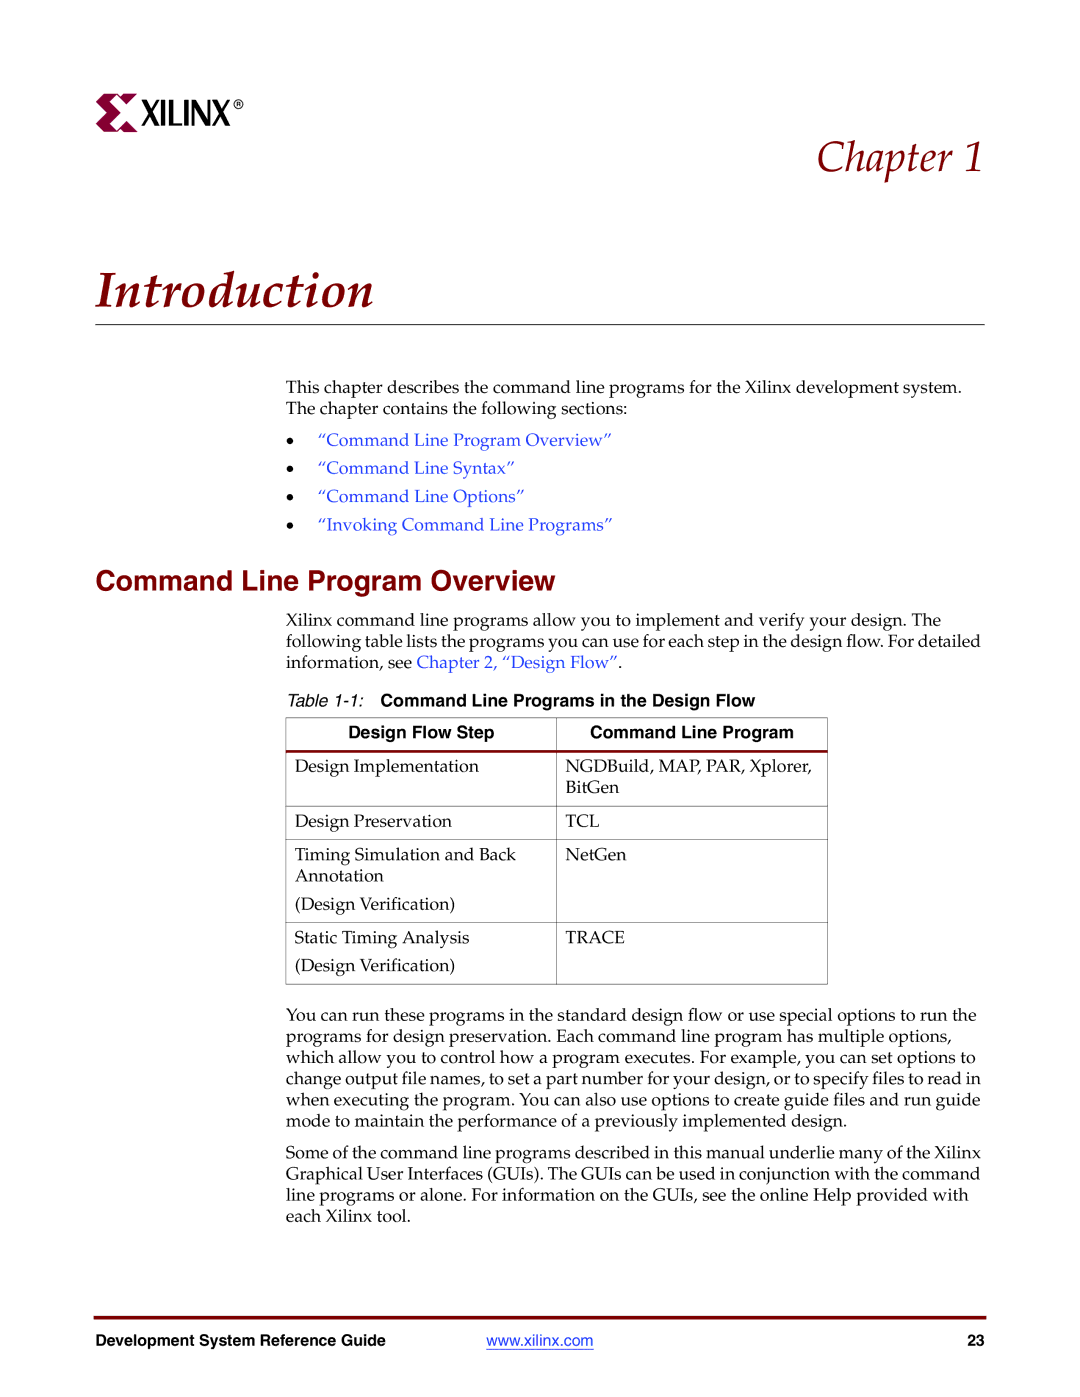 Xilinx 8.2i manual Introduction, Command Line Program Overview, 1Command Line Programs in the Design Flow Design Flow Step 